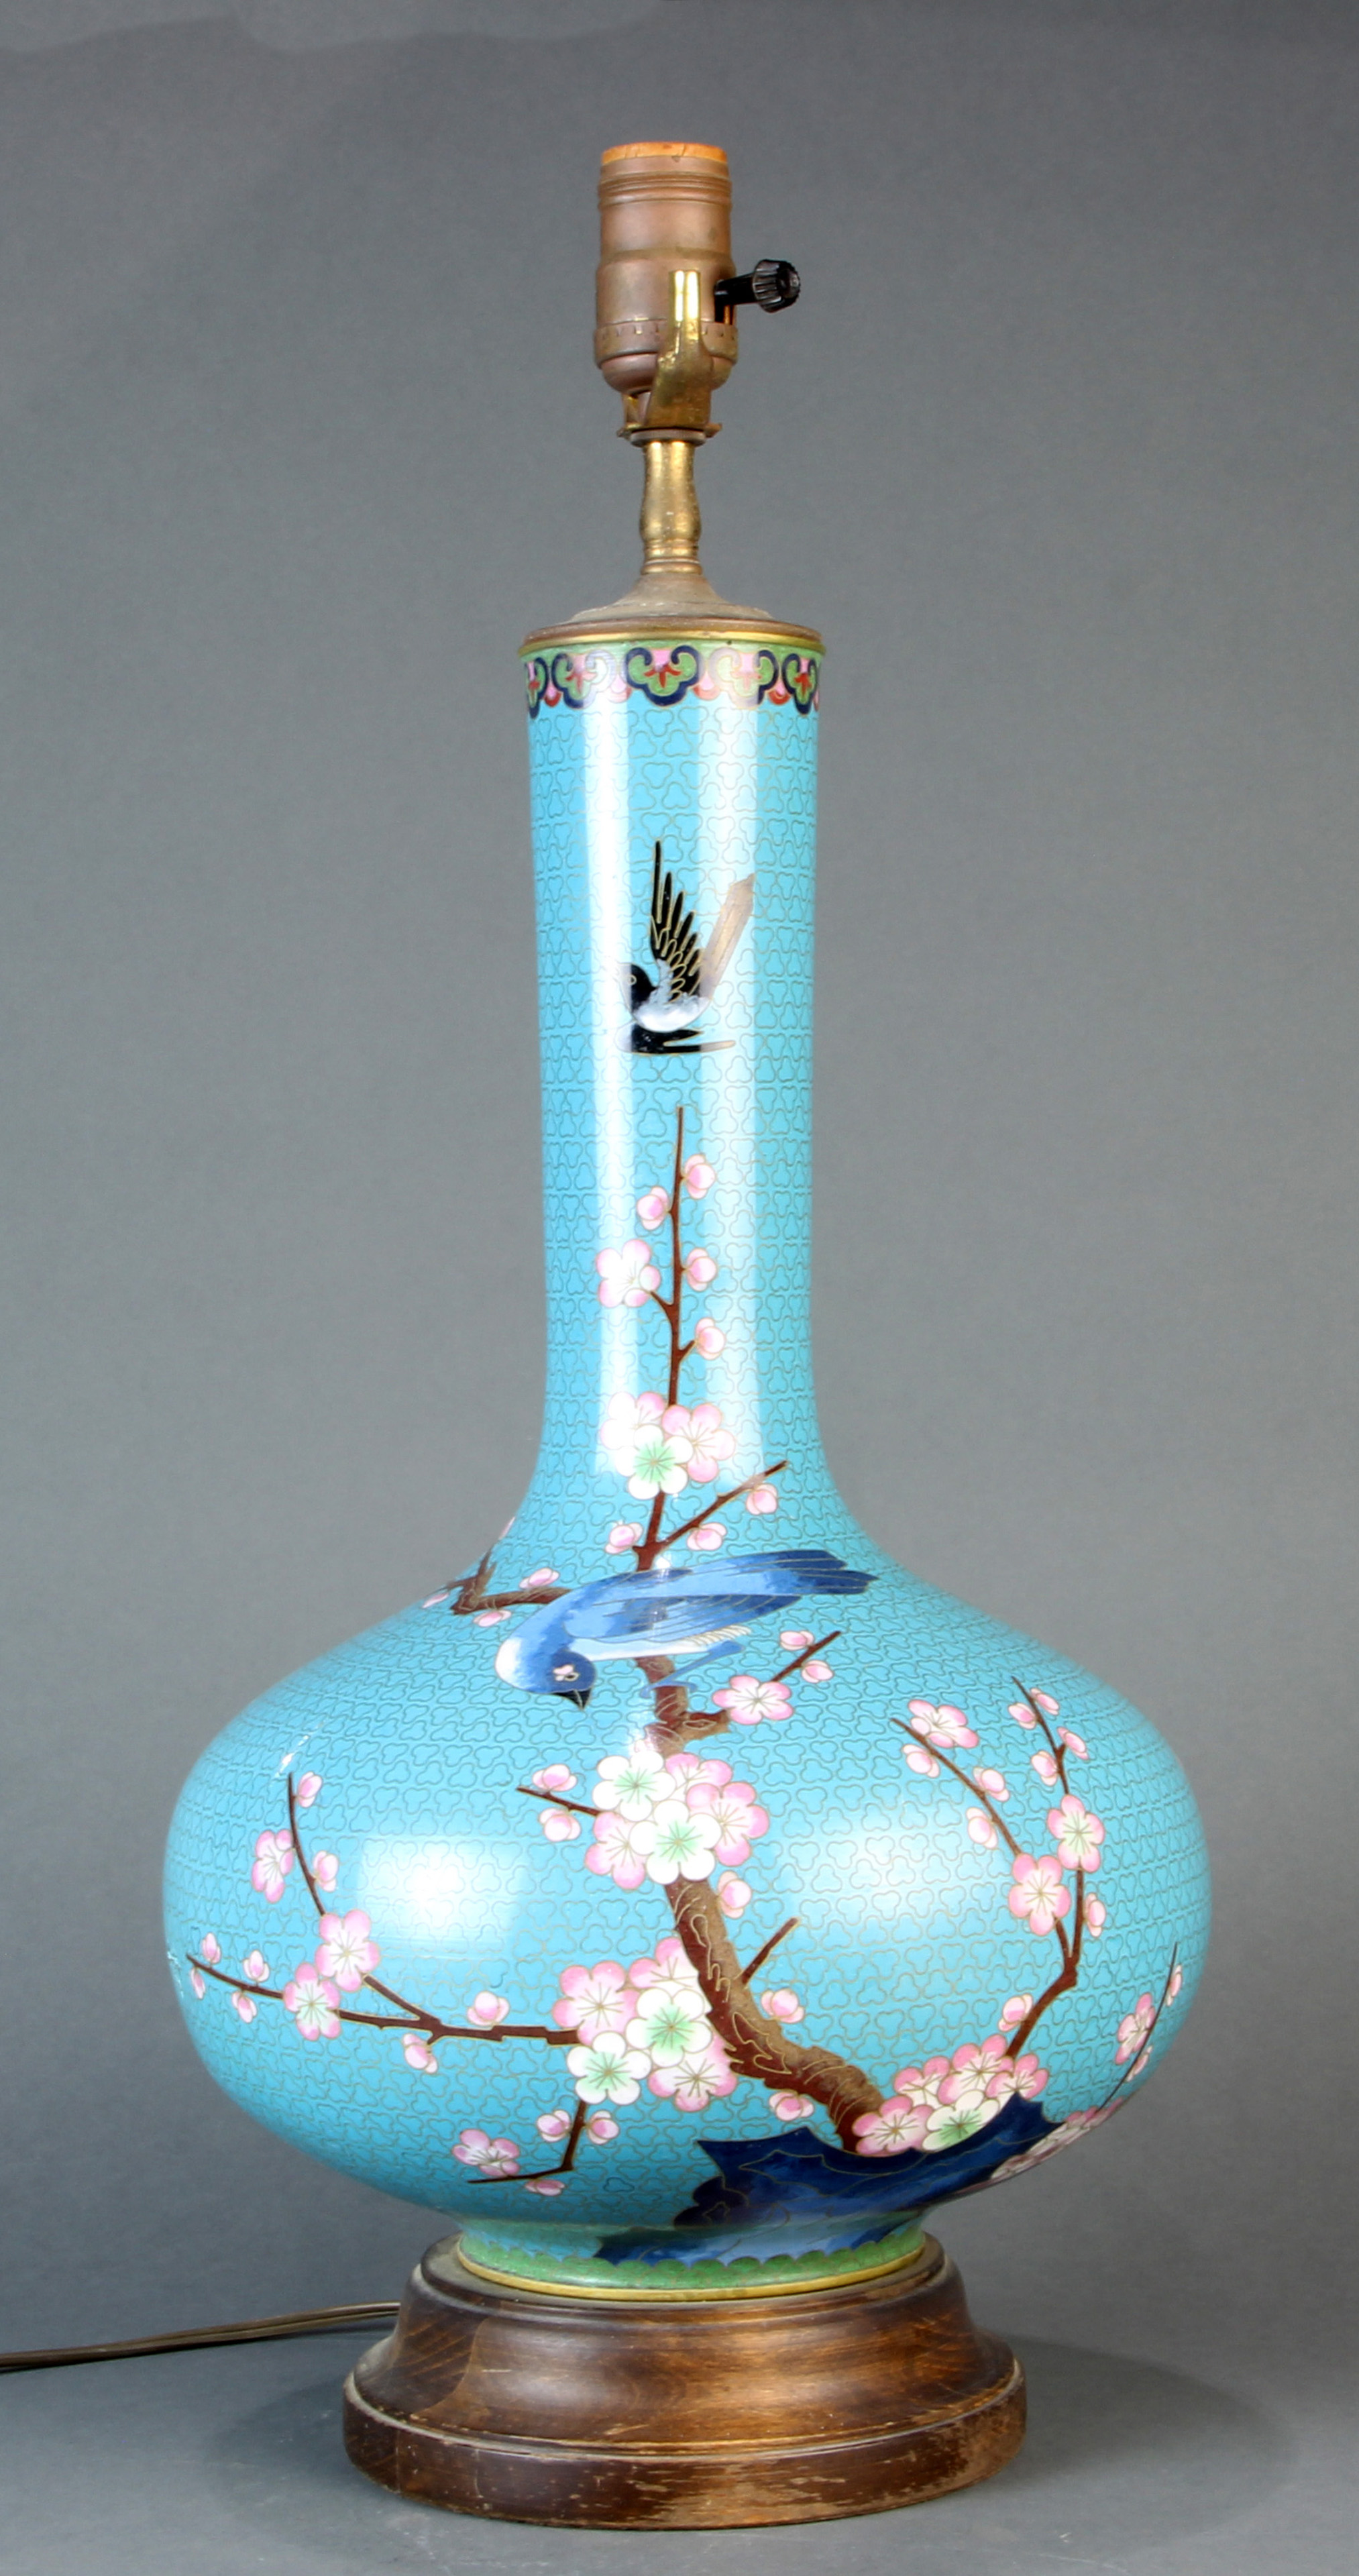 MASSIVE CHINESE CLOISONNE VASE 3a6bff